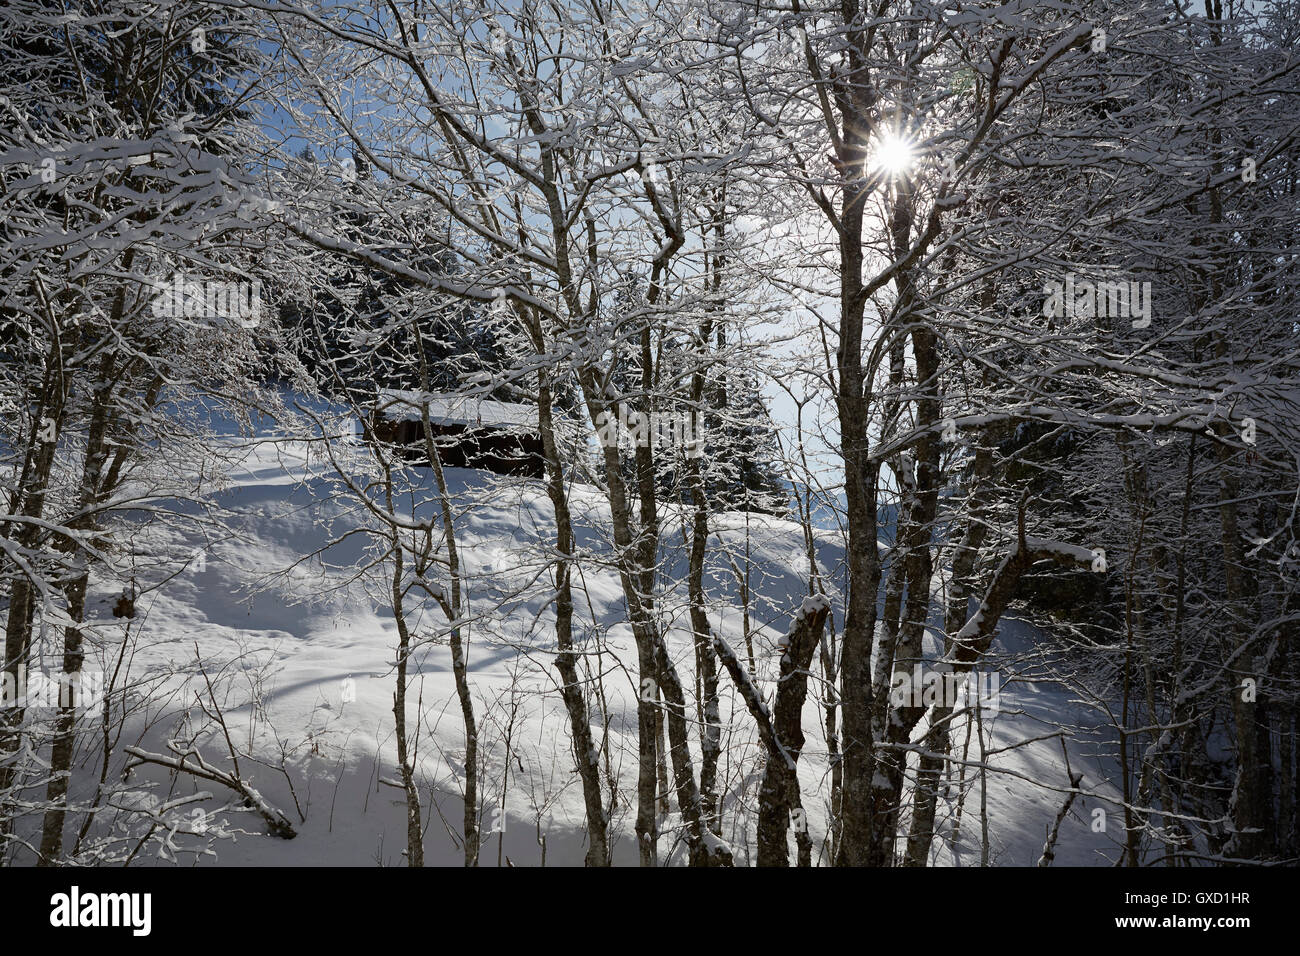 View through trees of log cabin on snow covered landscape, Elmau, Bavaria, Germany Stock Photo